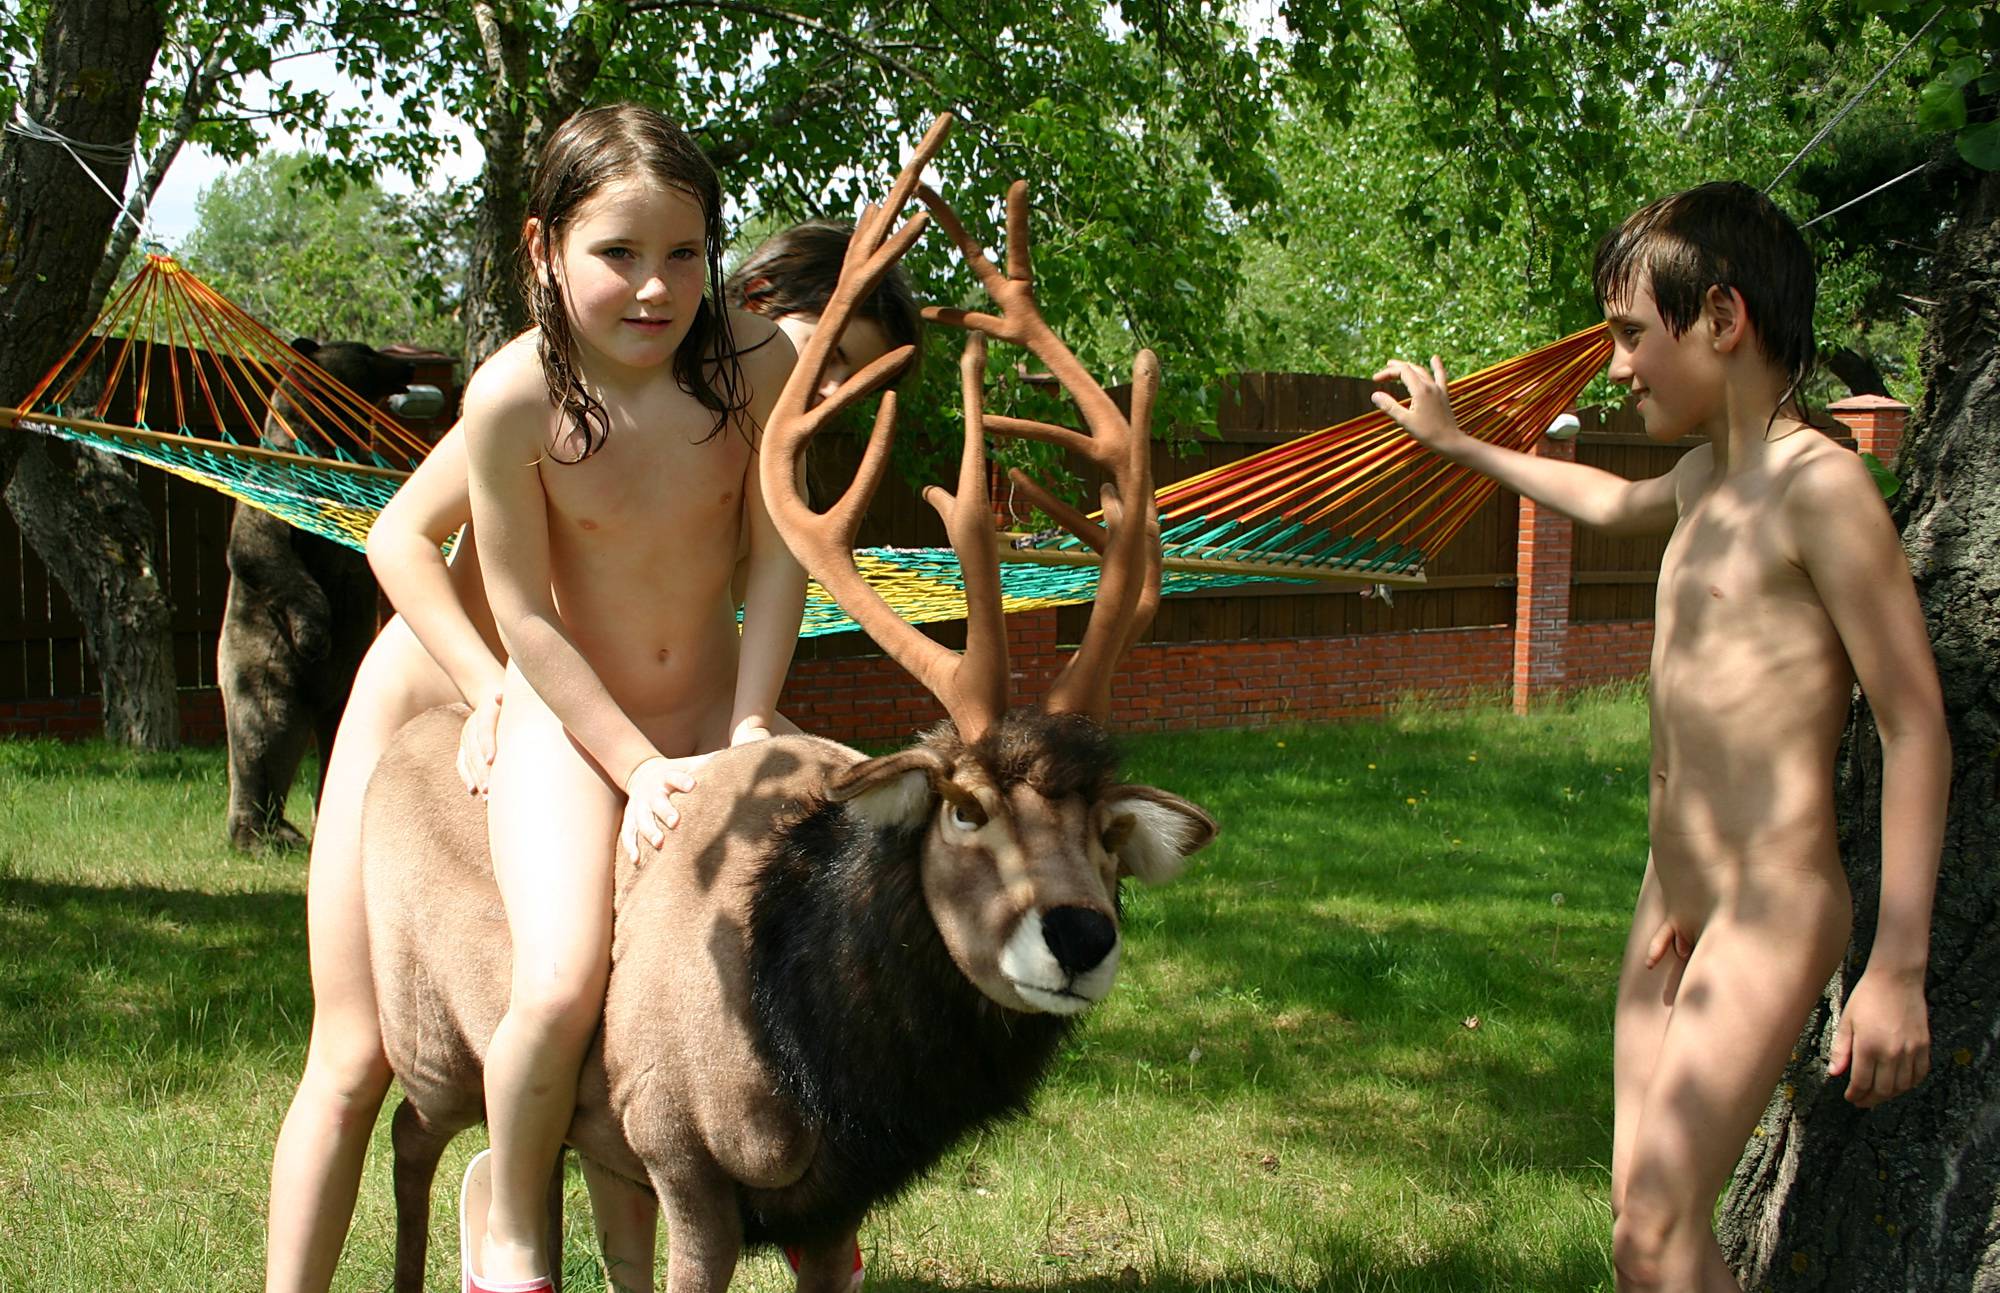 Pure Nudism Gallery Bring Out Outdoor Moose - 1